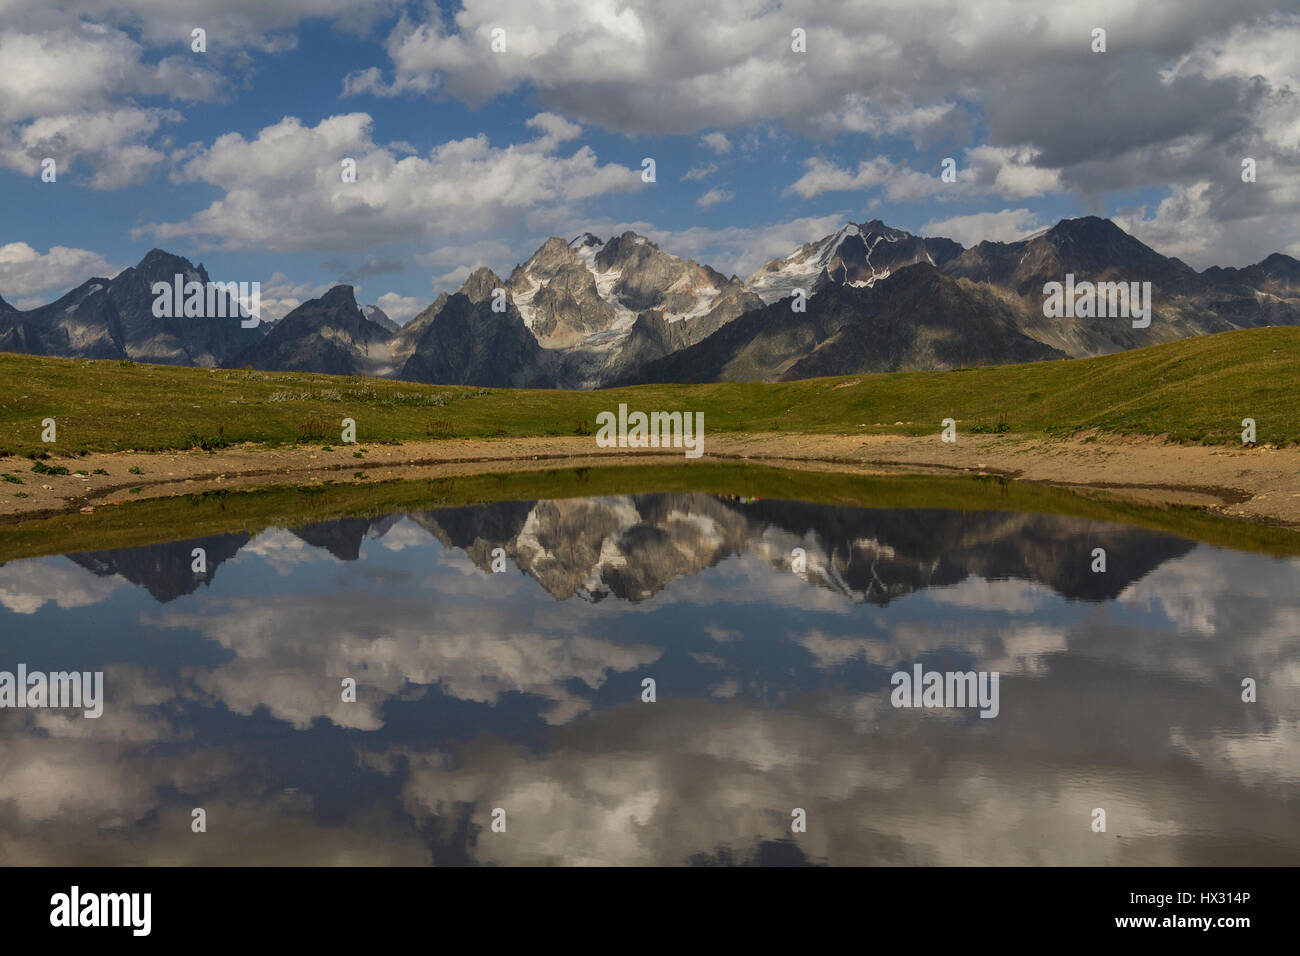 Reflections of the mountains in a lake, in the Caucasus Mountains, in Mestia, Georgia. Stock Photo